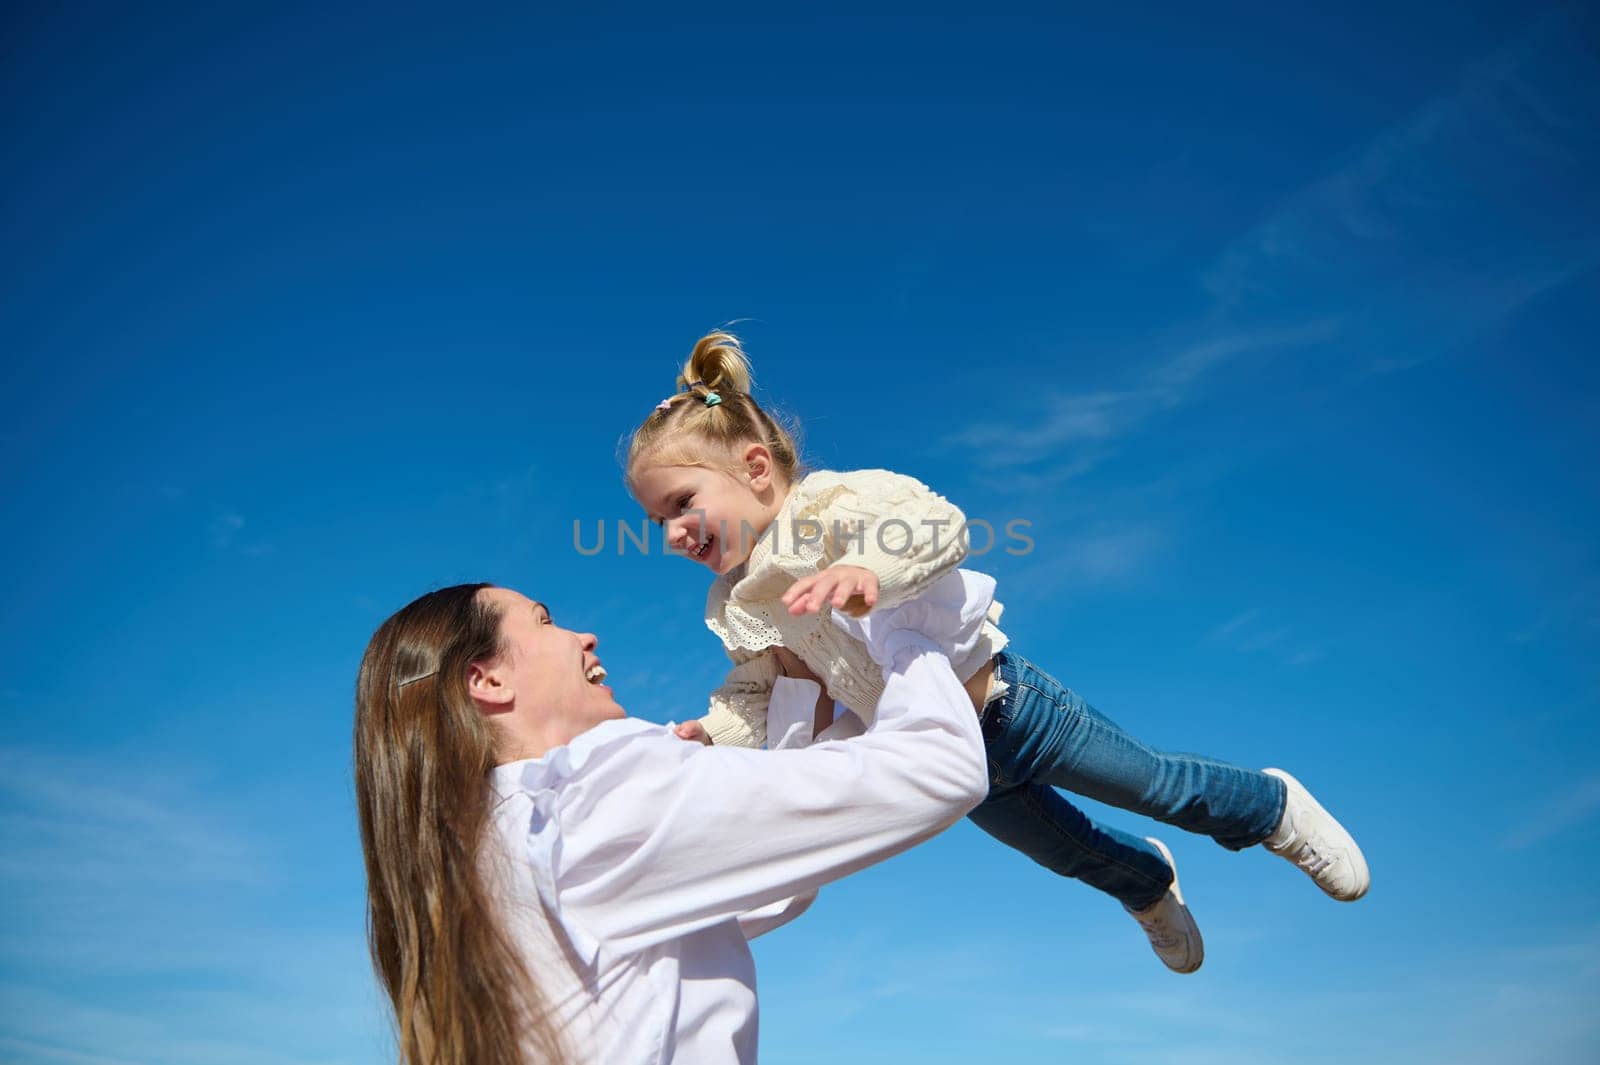 Bottom view of a happy harmonious family of a young loving caring mother throwing up her little baby, a cute child girl, laughing and playing in the summer on the nature against blue sky background